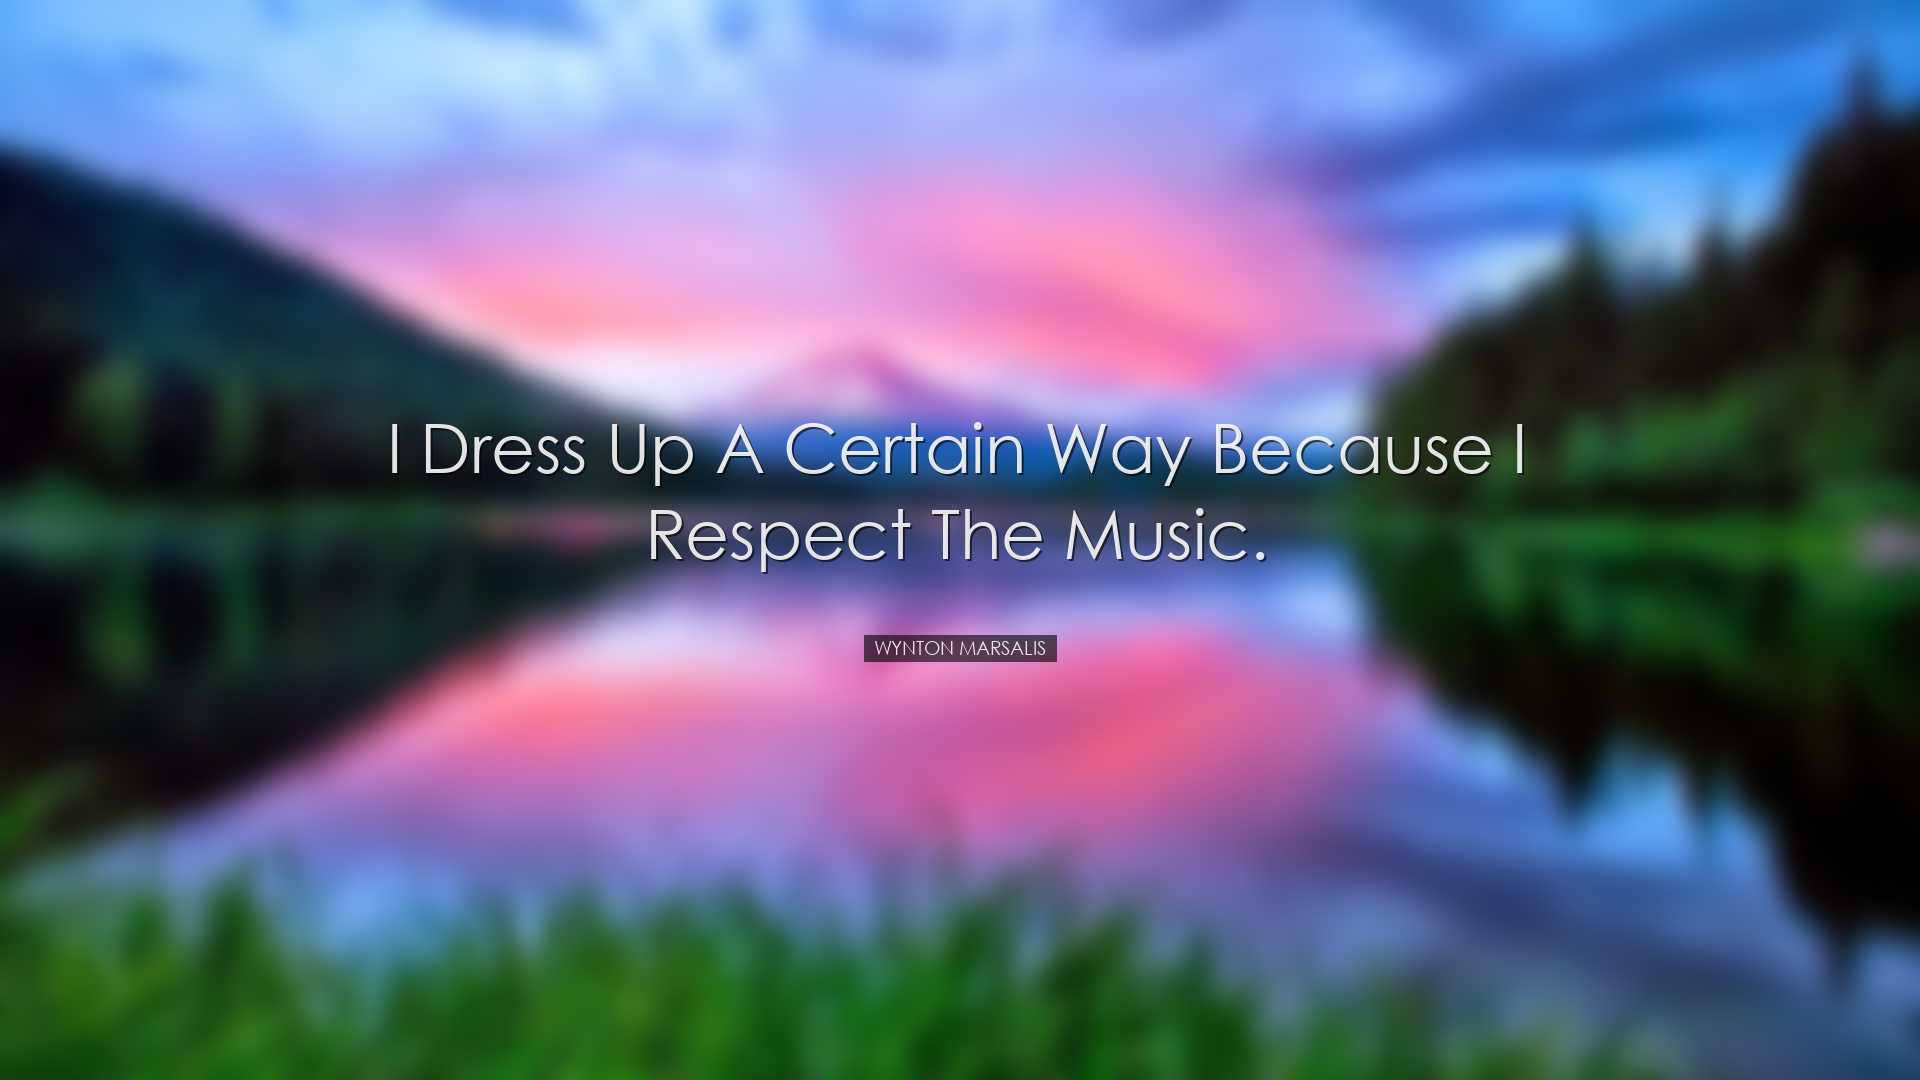 I dress up a certain way because I respect the music. - Wynton Mar